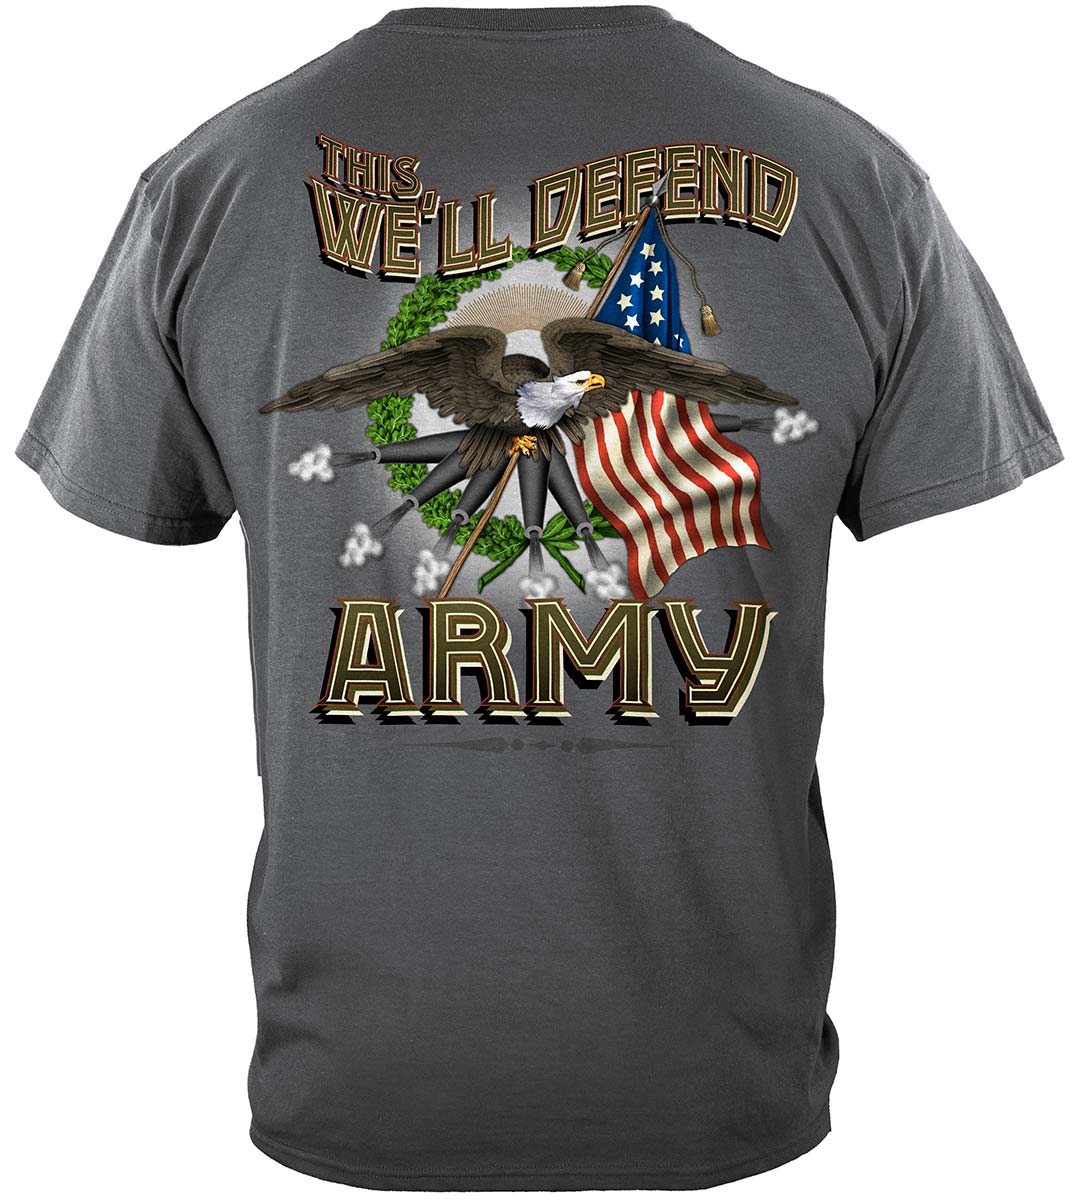 Army Cannons Premium Long Sleeves